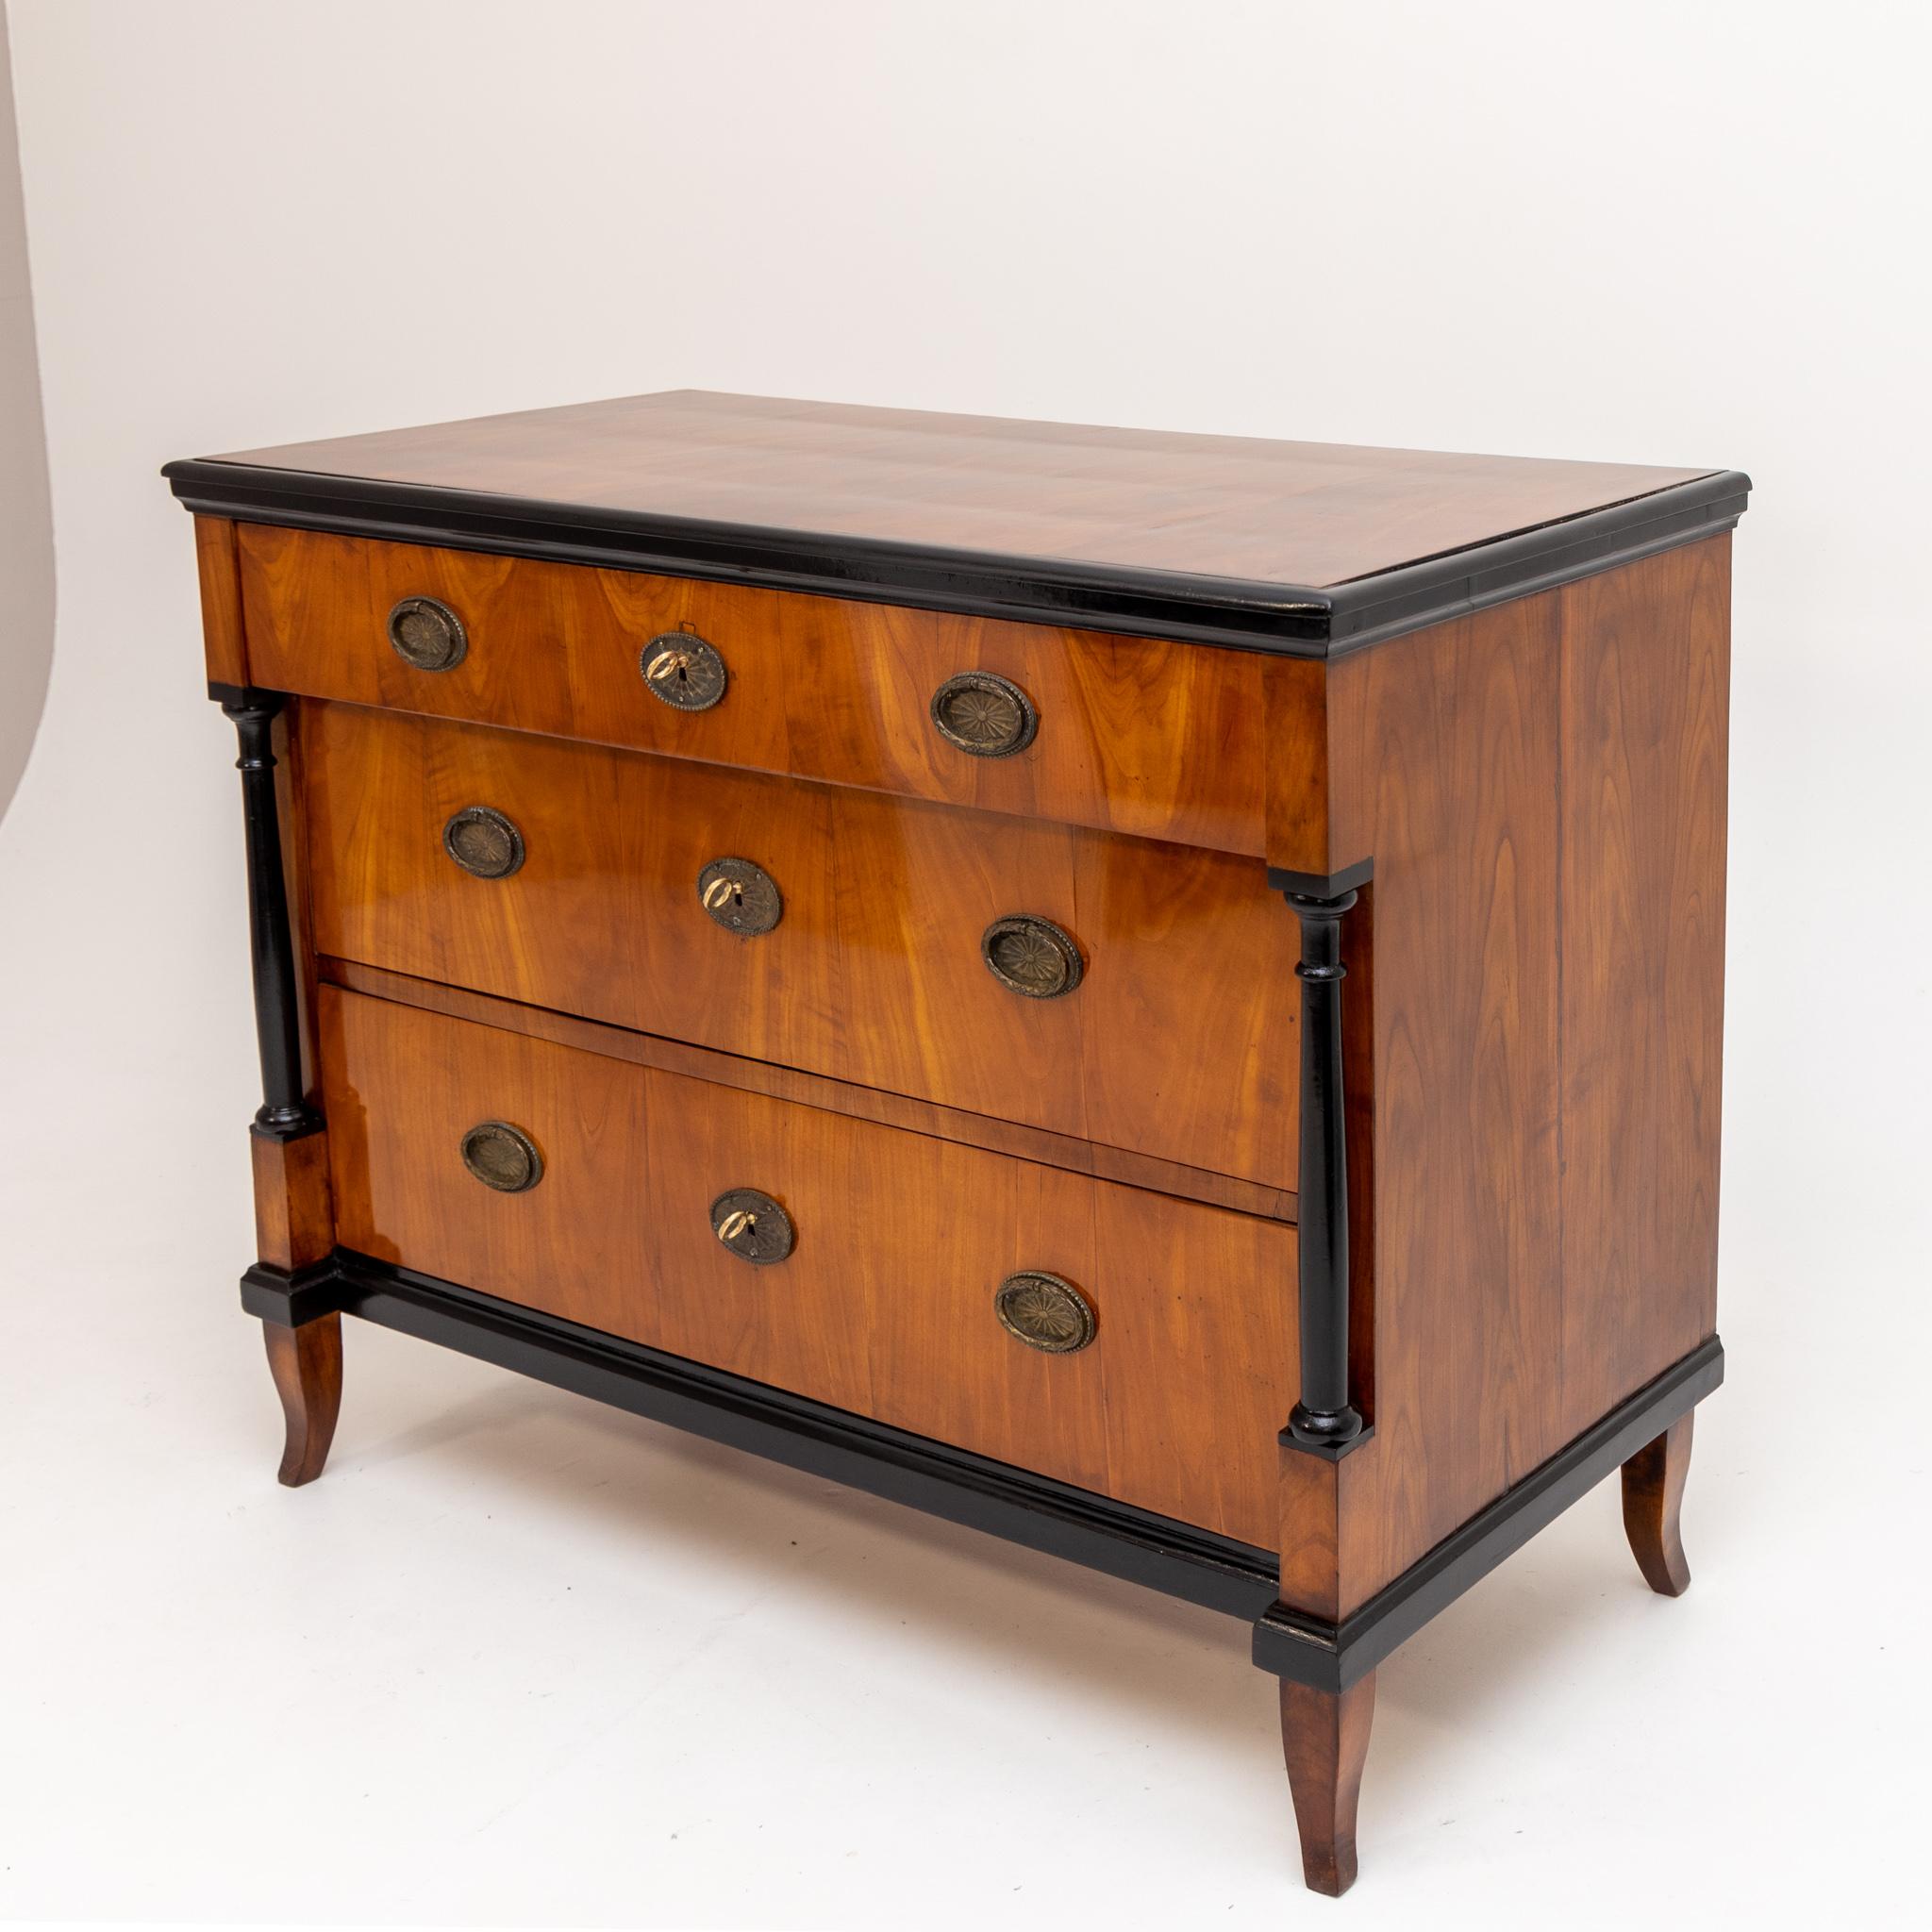 Three-bay Biedermeier chest of drawers on s-legs with ebonised columns and profiles. The corpus is veneered in cherry.